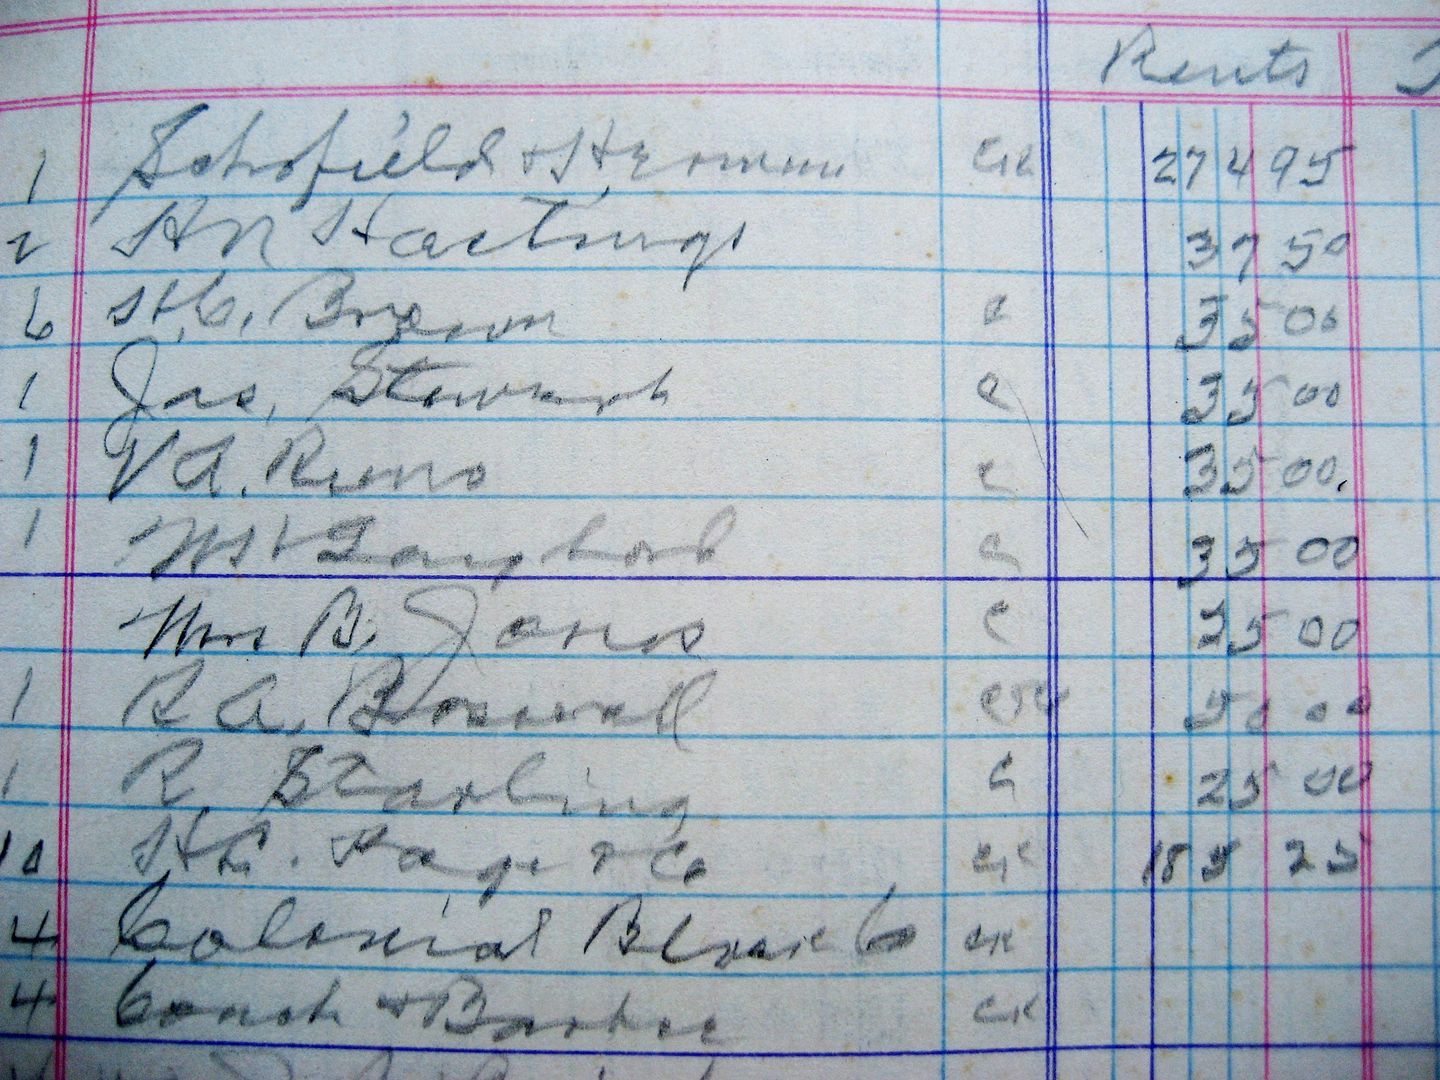 The ledger shows the rental prices in 1953. 